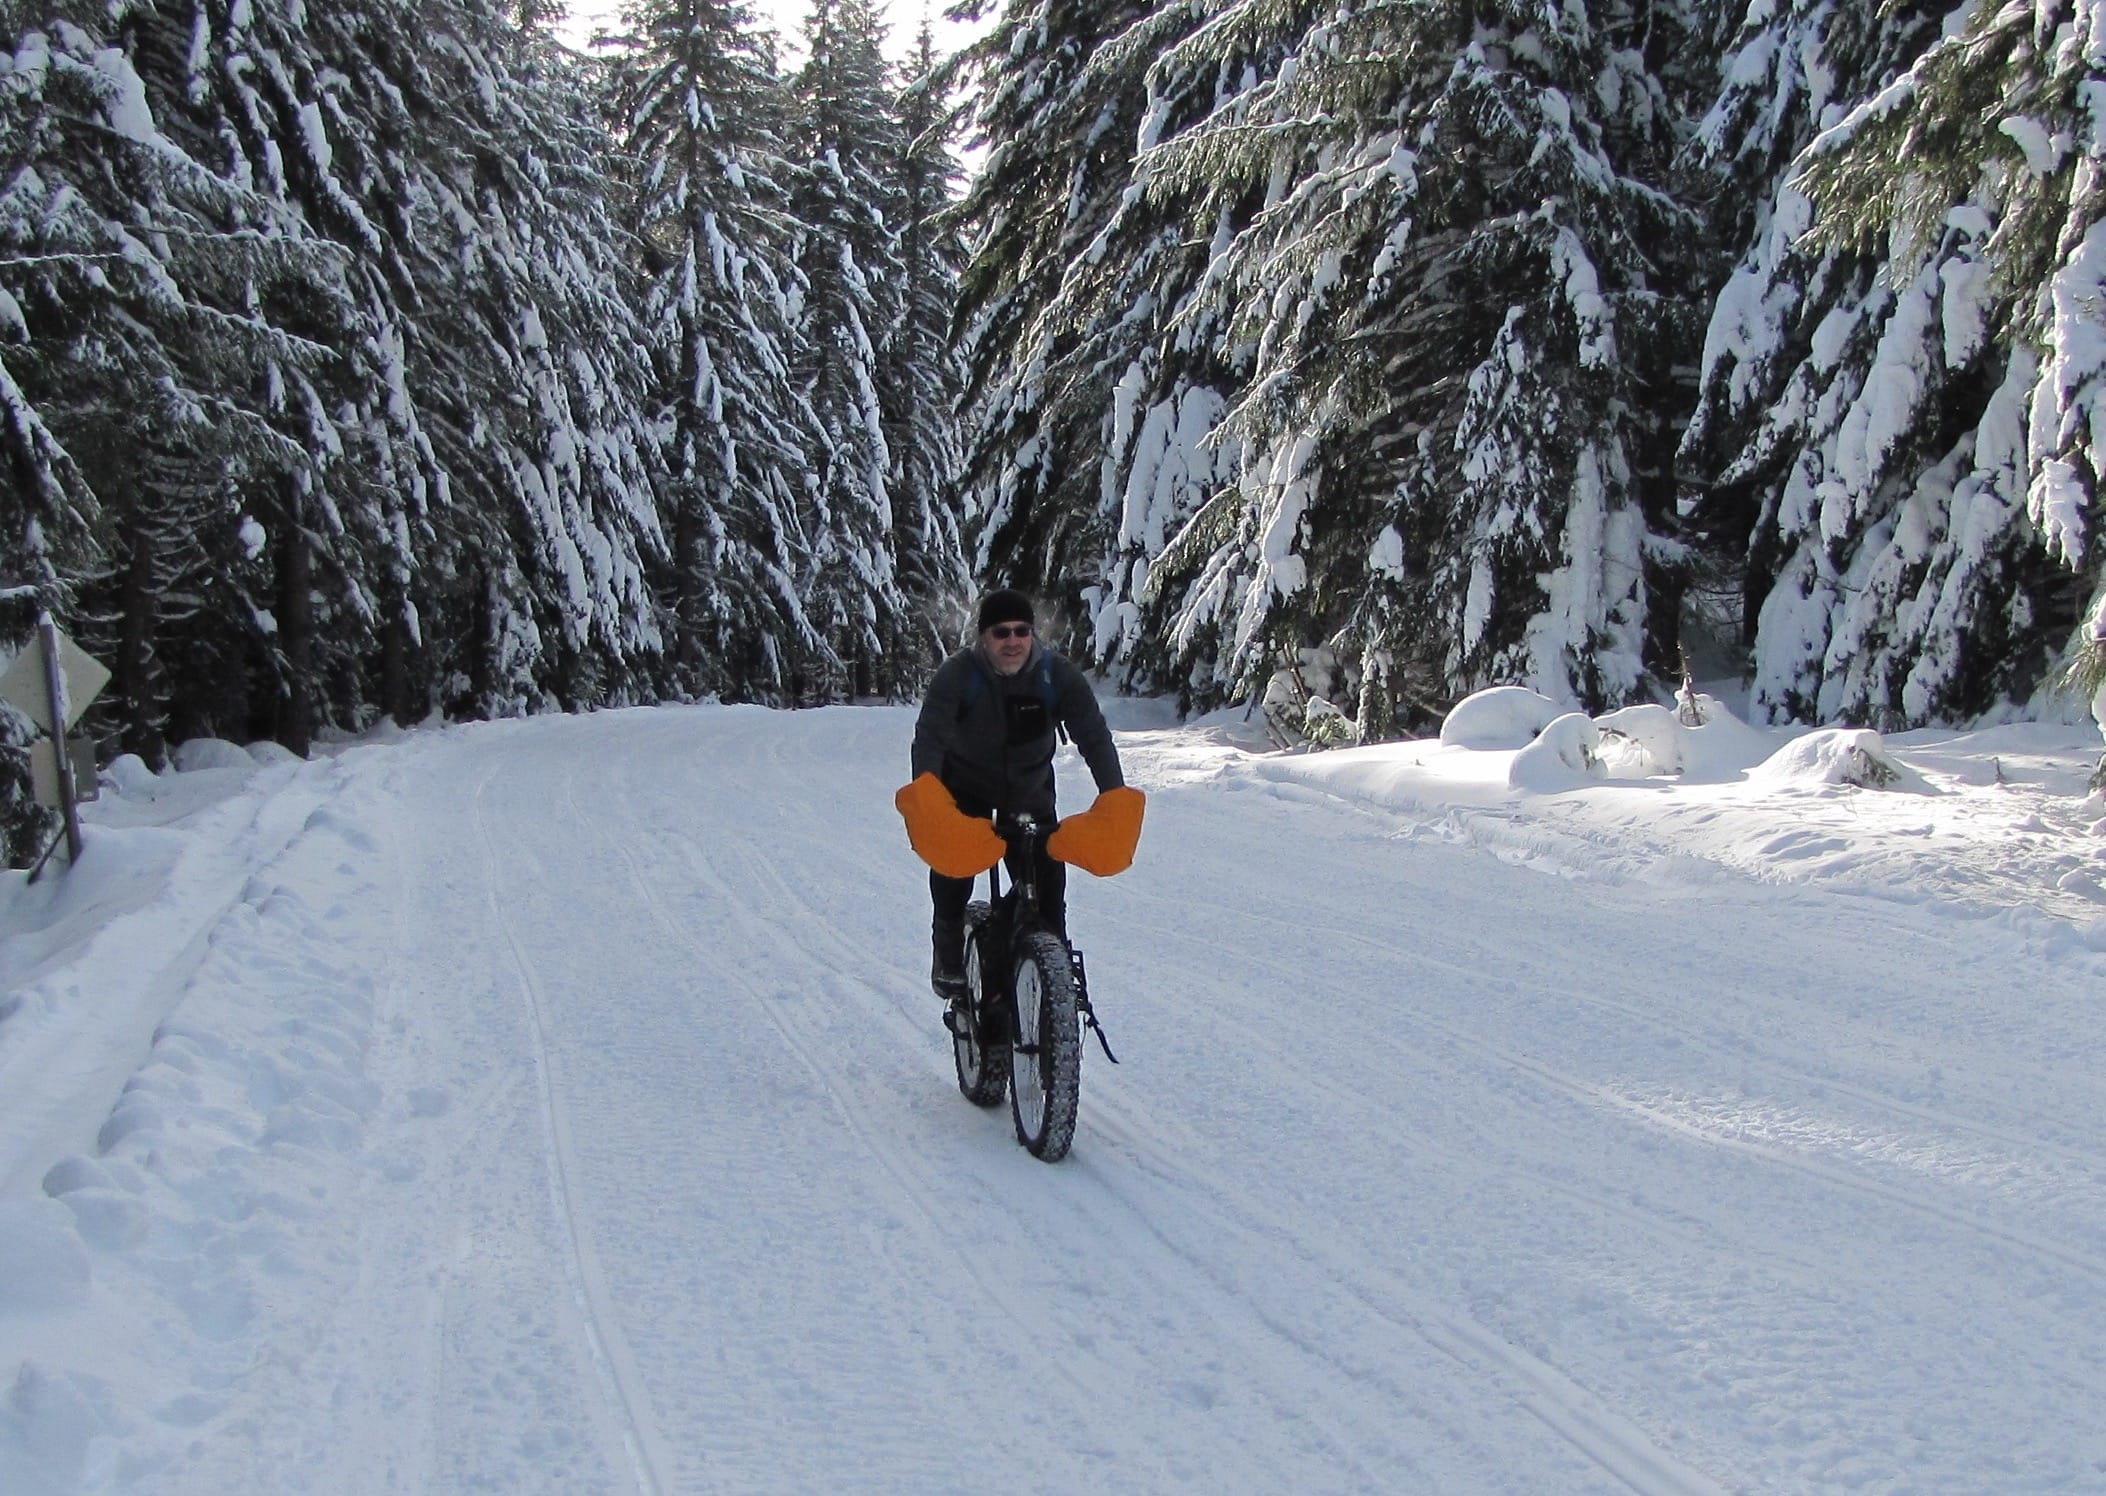 Road No. 83 leading east from Marble Mountain Sno-Park on the south side of Mount St. Helens doubles as a route for fat-tire cycling enthusiasts.